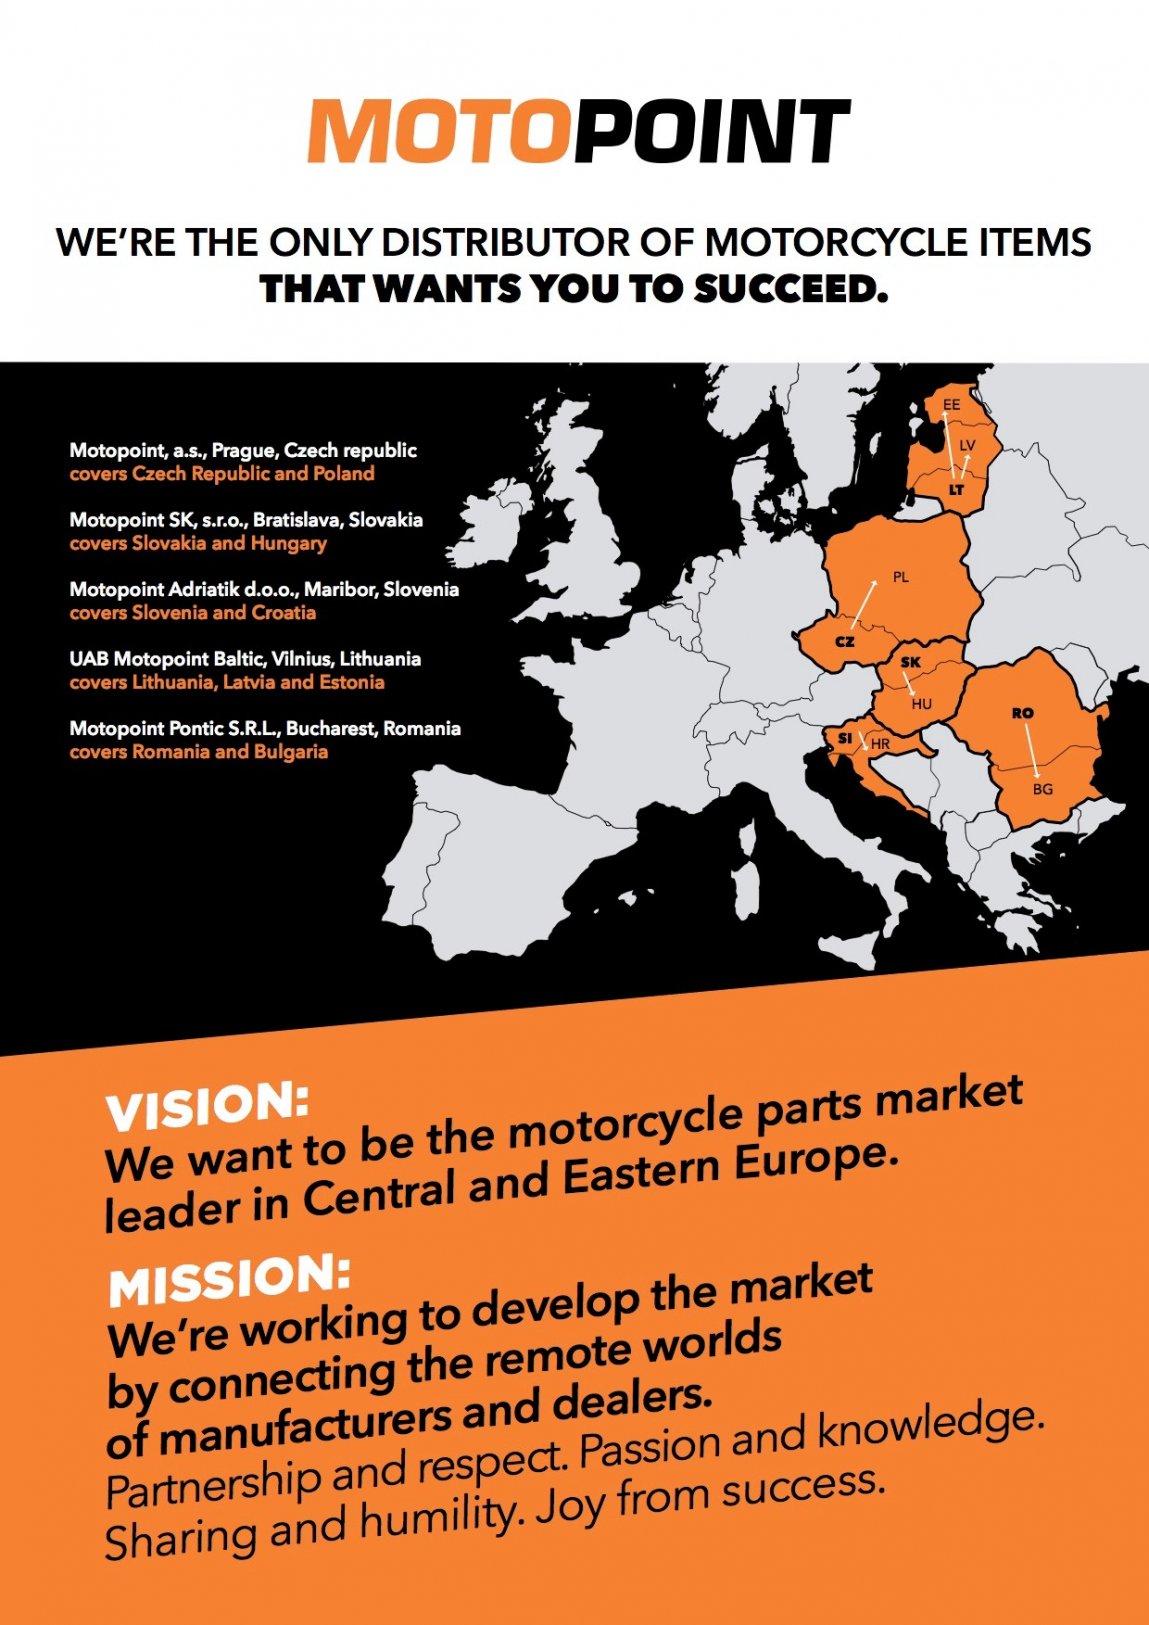 Motopoint - our mission / vision